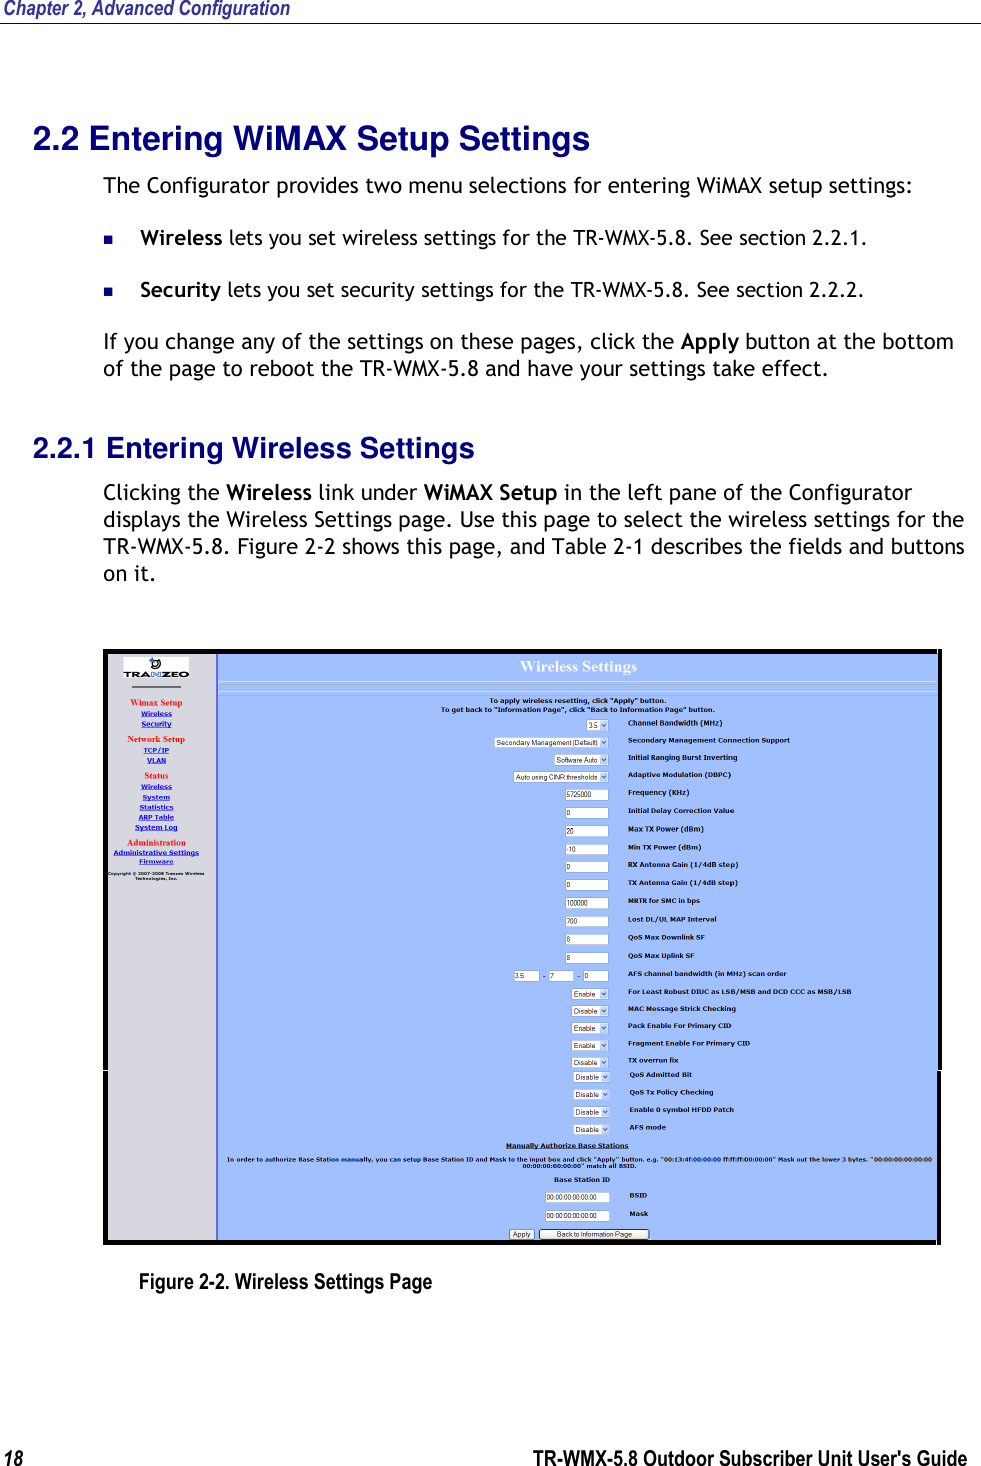 Chapter 2, Advanced Configuration 18        TR-WMX-5.8 Outdoor Subscriber Unit User&apos;s Guide  2.2 Entering WiMAX Setup Settings The Configurator provides two menu selections for entering WiMAX setup settings:  Wireless lets you set wireless settings for the TR-WMX-5.8. See section 2.2.1.  Security lets you set security settings for the TR-WMX-5.8. See section 2.2.2. If you change any of the settings on these pages, click the Apply button at the bottom of the page to reboot the TR-WMX-5.8 and have your settings take effect. 2.2.1 Entering Wireless Settings Clicking the Wireless link under WiMAX Setup in the left pane of the Configurator displays the Wireless Settings page. Use this page to select the wireless settings for the TR-WMX-5.8. Figure 2-2 shows this page, and Table 2-1 describes the fields and buttons on it.   Figure 2-2. Wireless Settings Page 